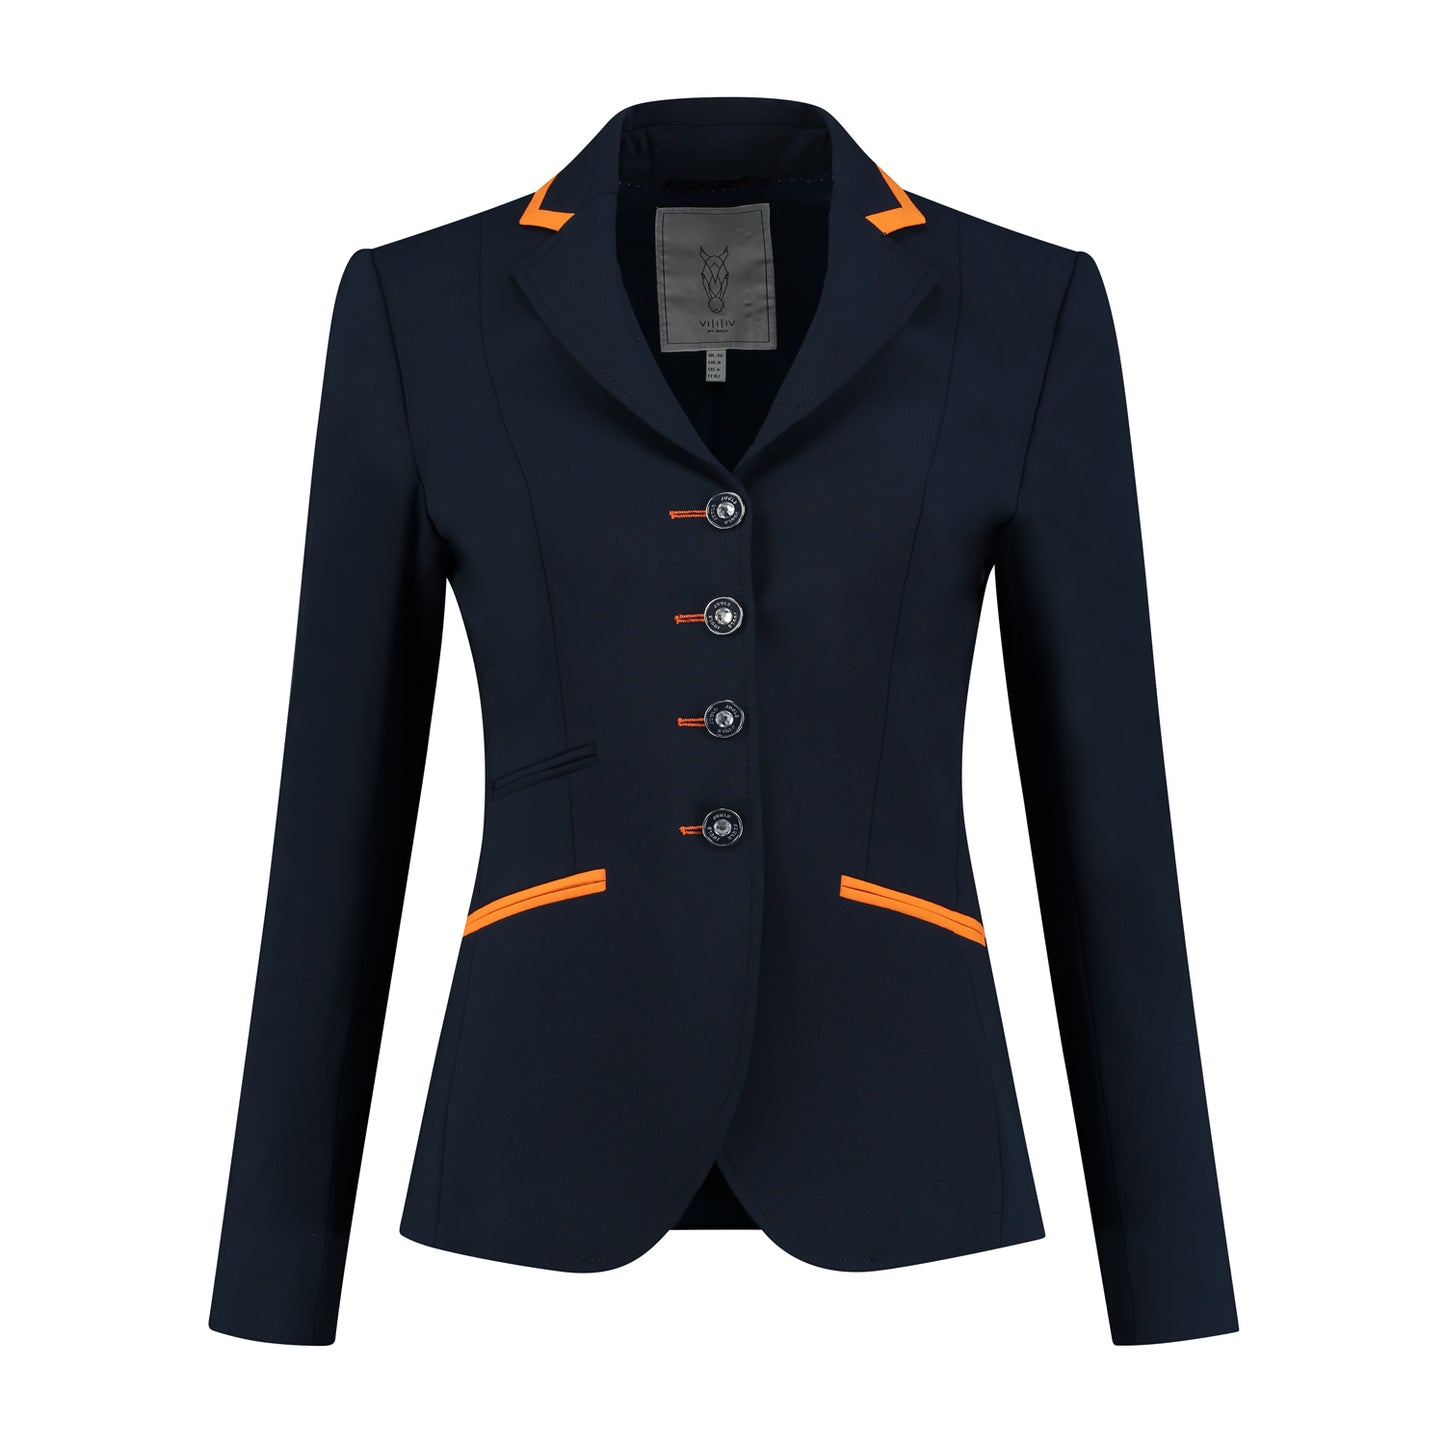 Navy competition jacket - orange piping